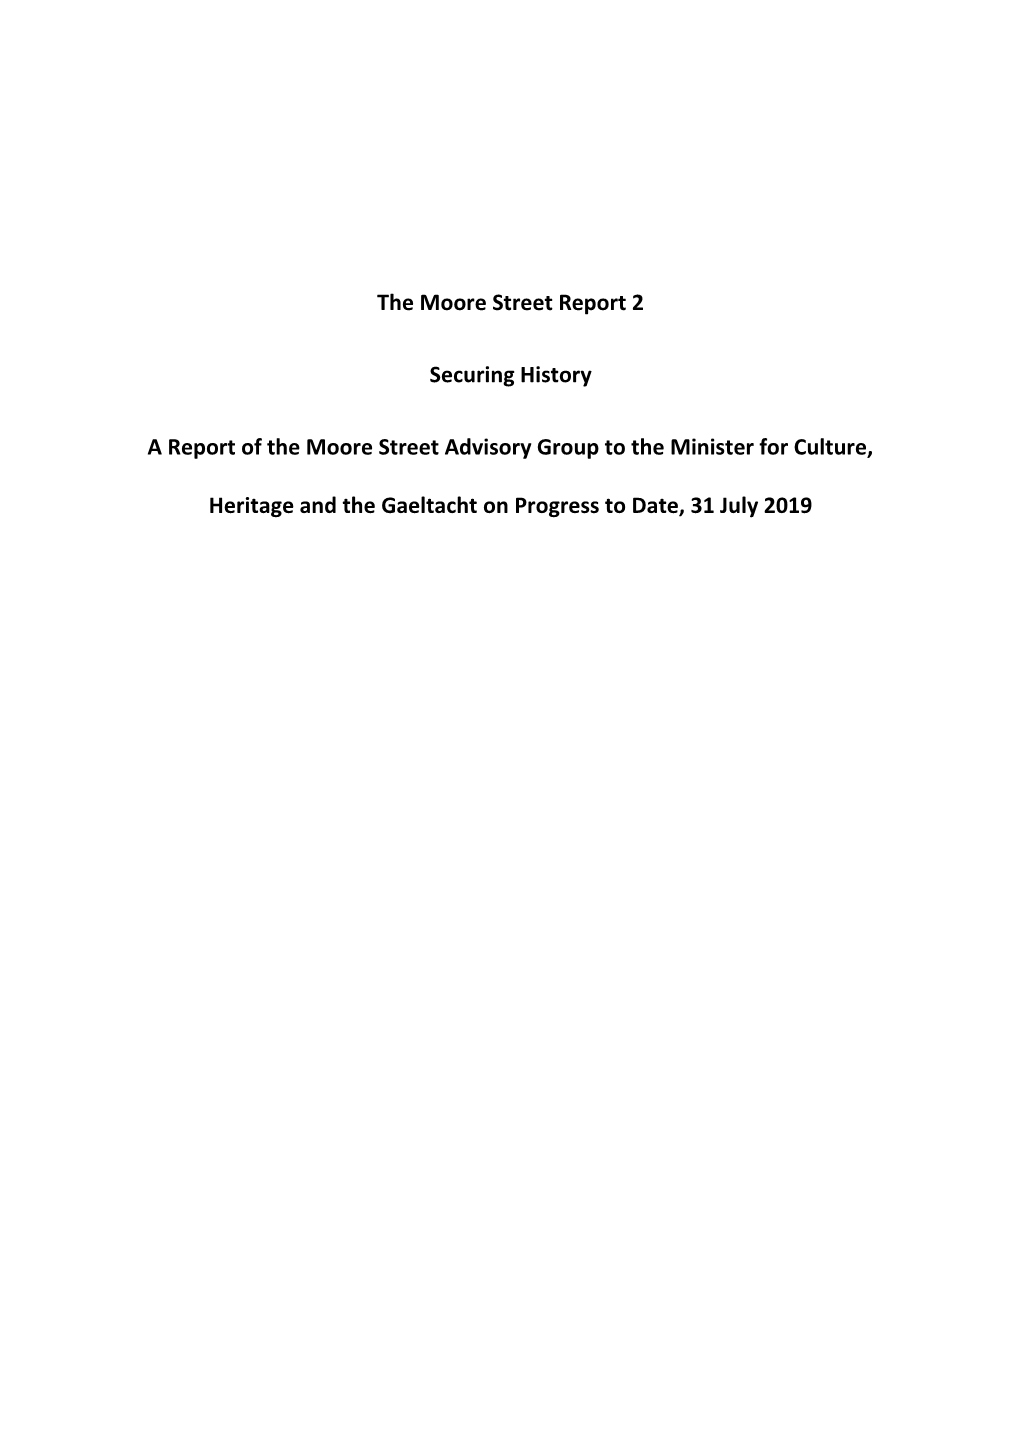 The Moore Street Report 2 Securing History a Report of the Moore Street